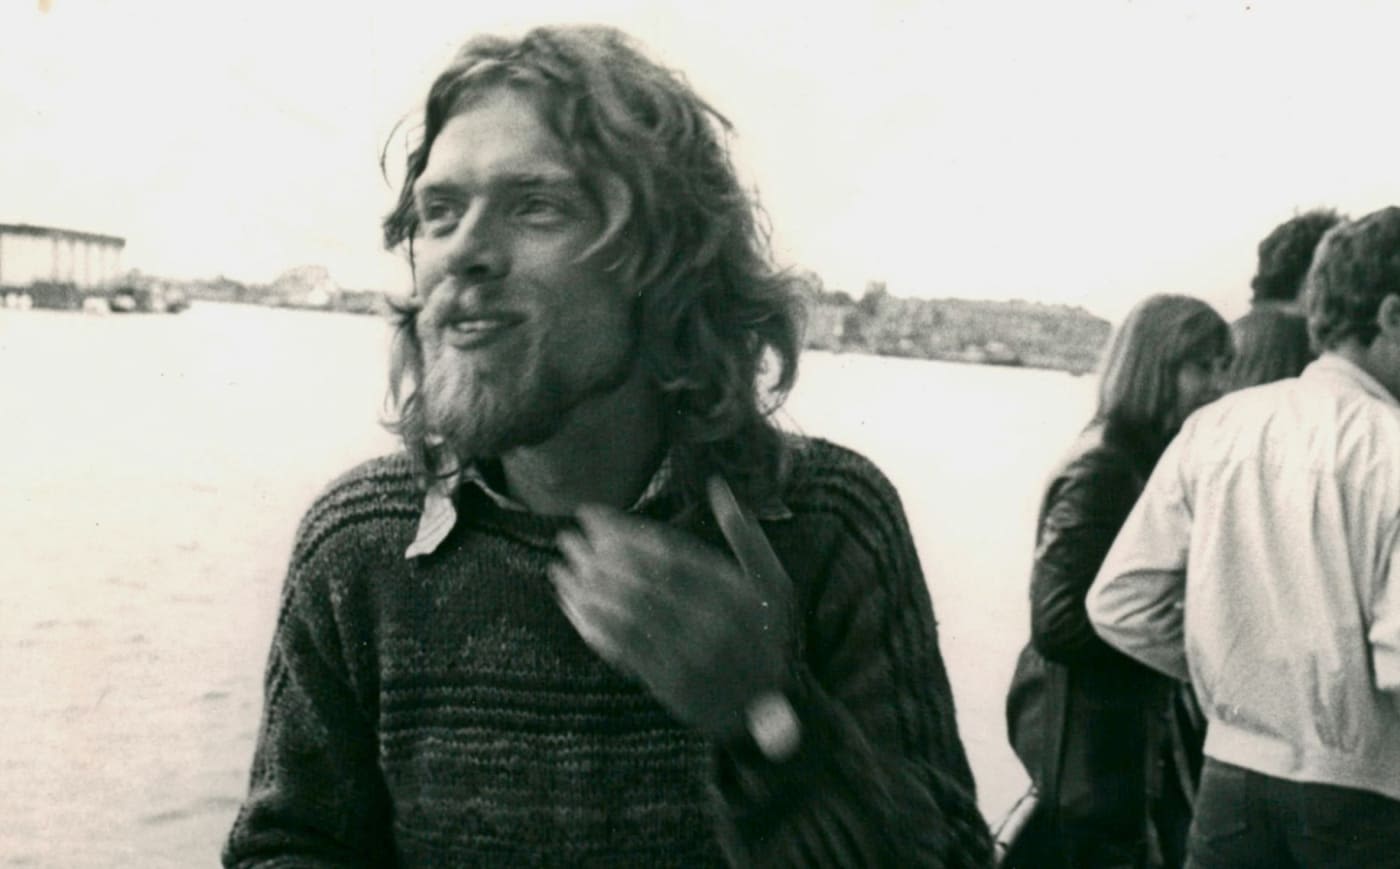 A black and white image of Richard Branson with long hair and a beard